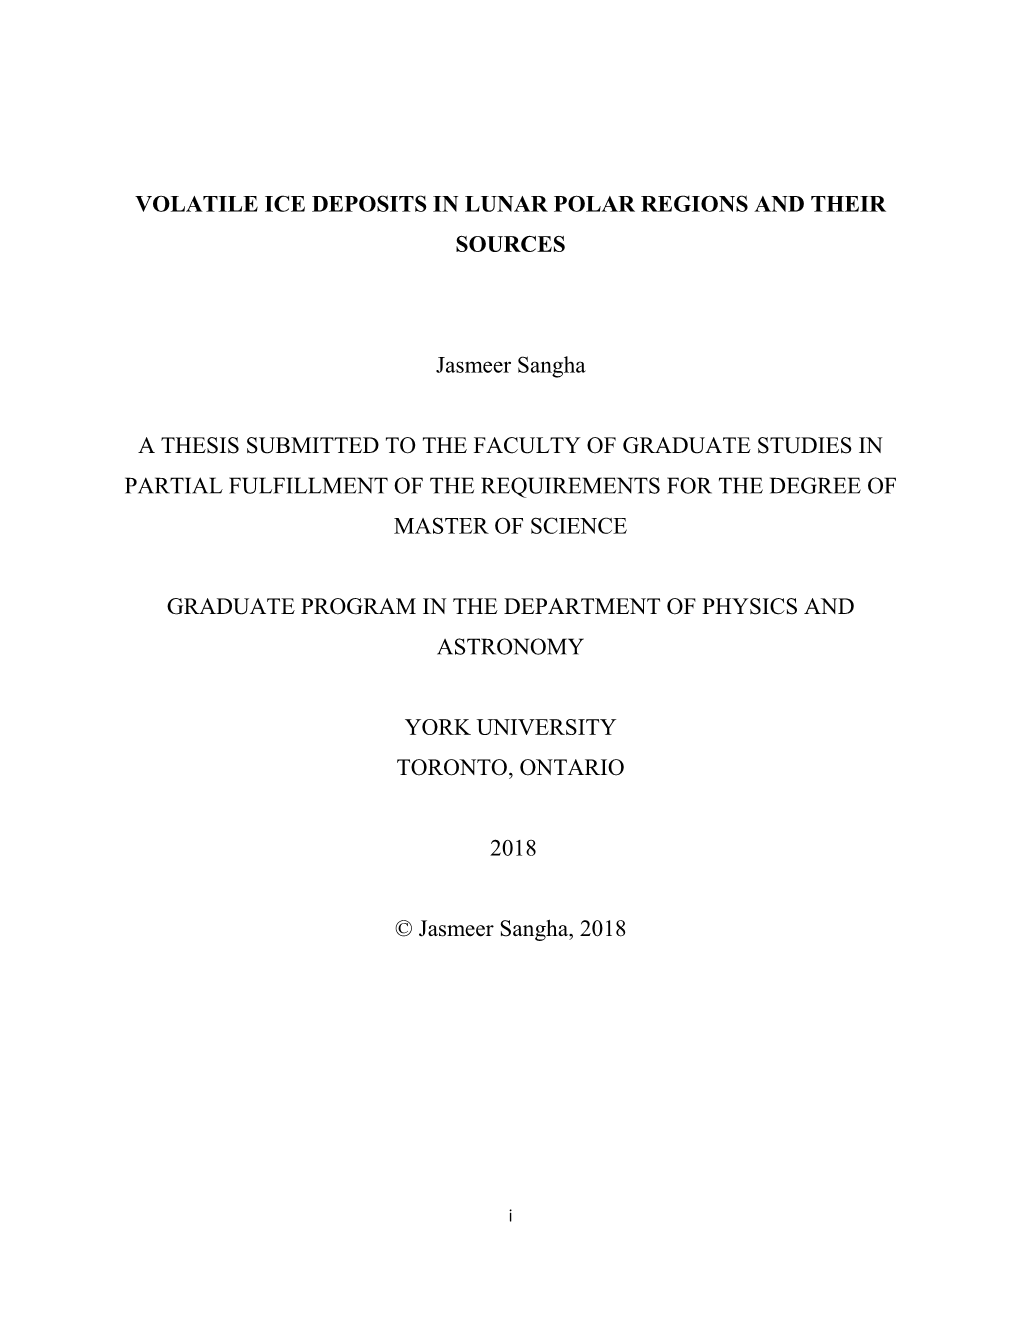 VOLATILE ICE DEPOSITS in LUNAR POLAR REGIONS and THEIR SOURCES Jasmeer Sangha a THESIS SUBMITTED to the FACULTY of GRADUATE STUD